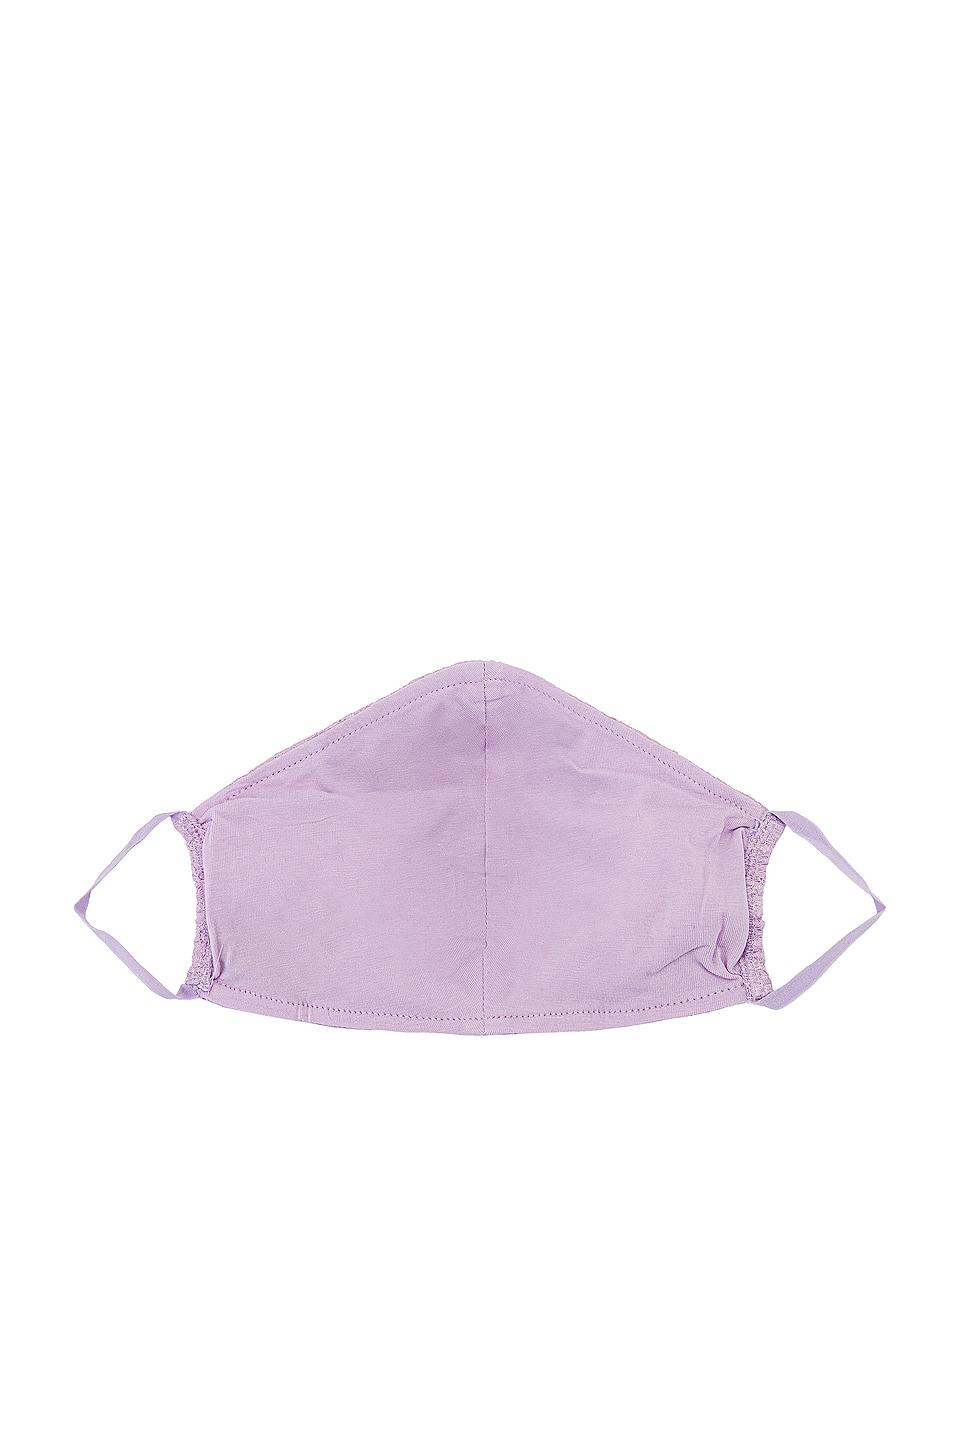 Cosabella Lace V Face Mask in Lavender (Purple) - Lyst